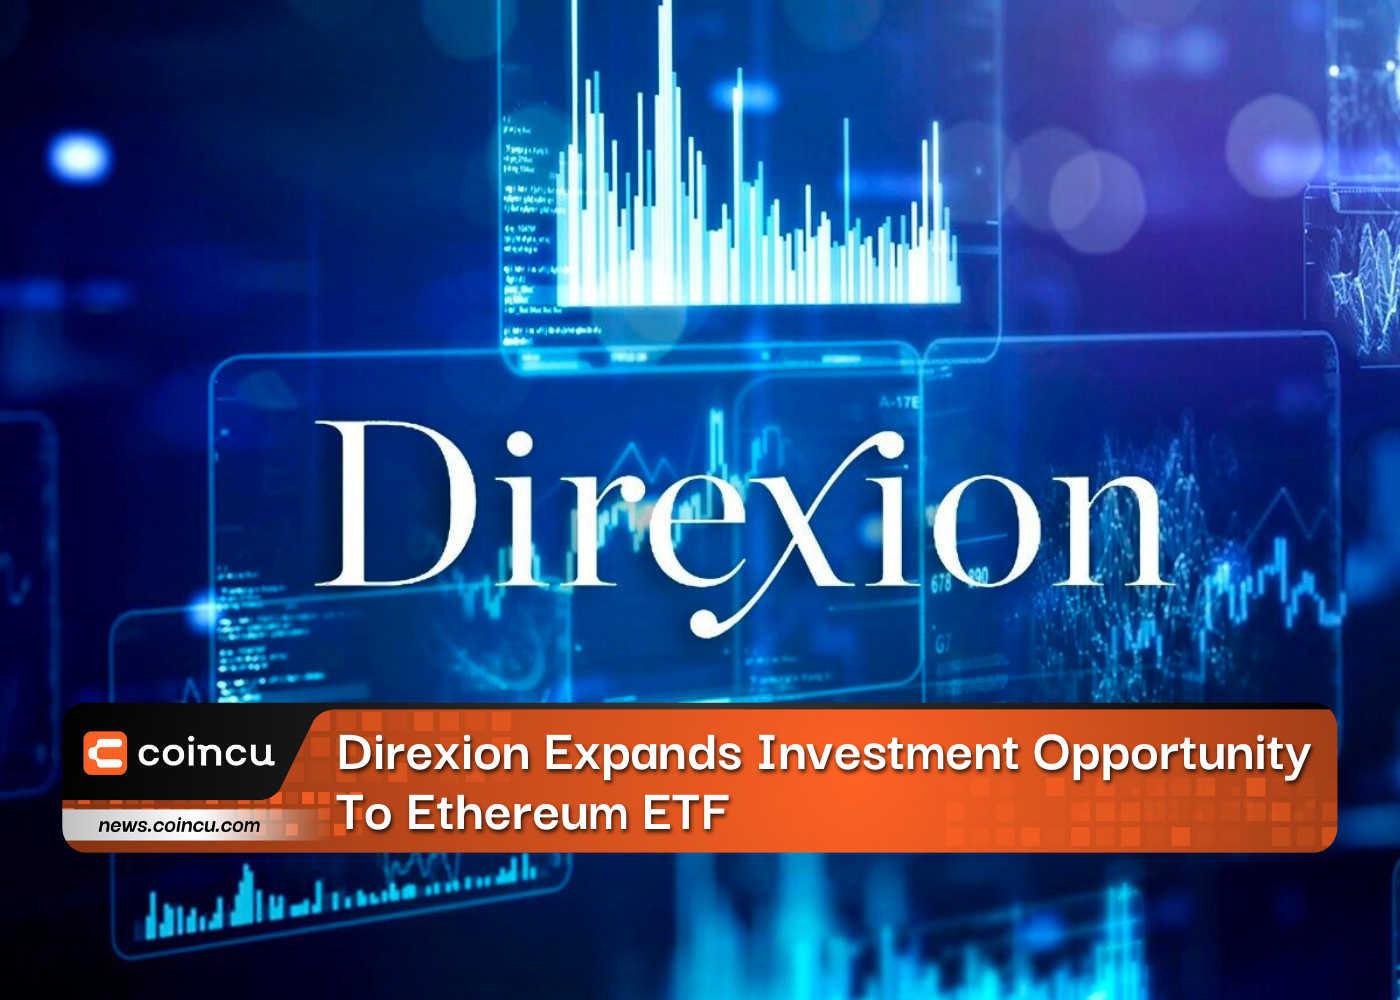 Direxion Expands Investment Opportunity To Ethereum ETF